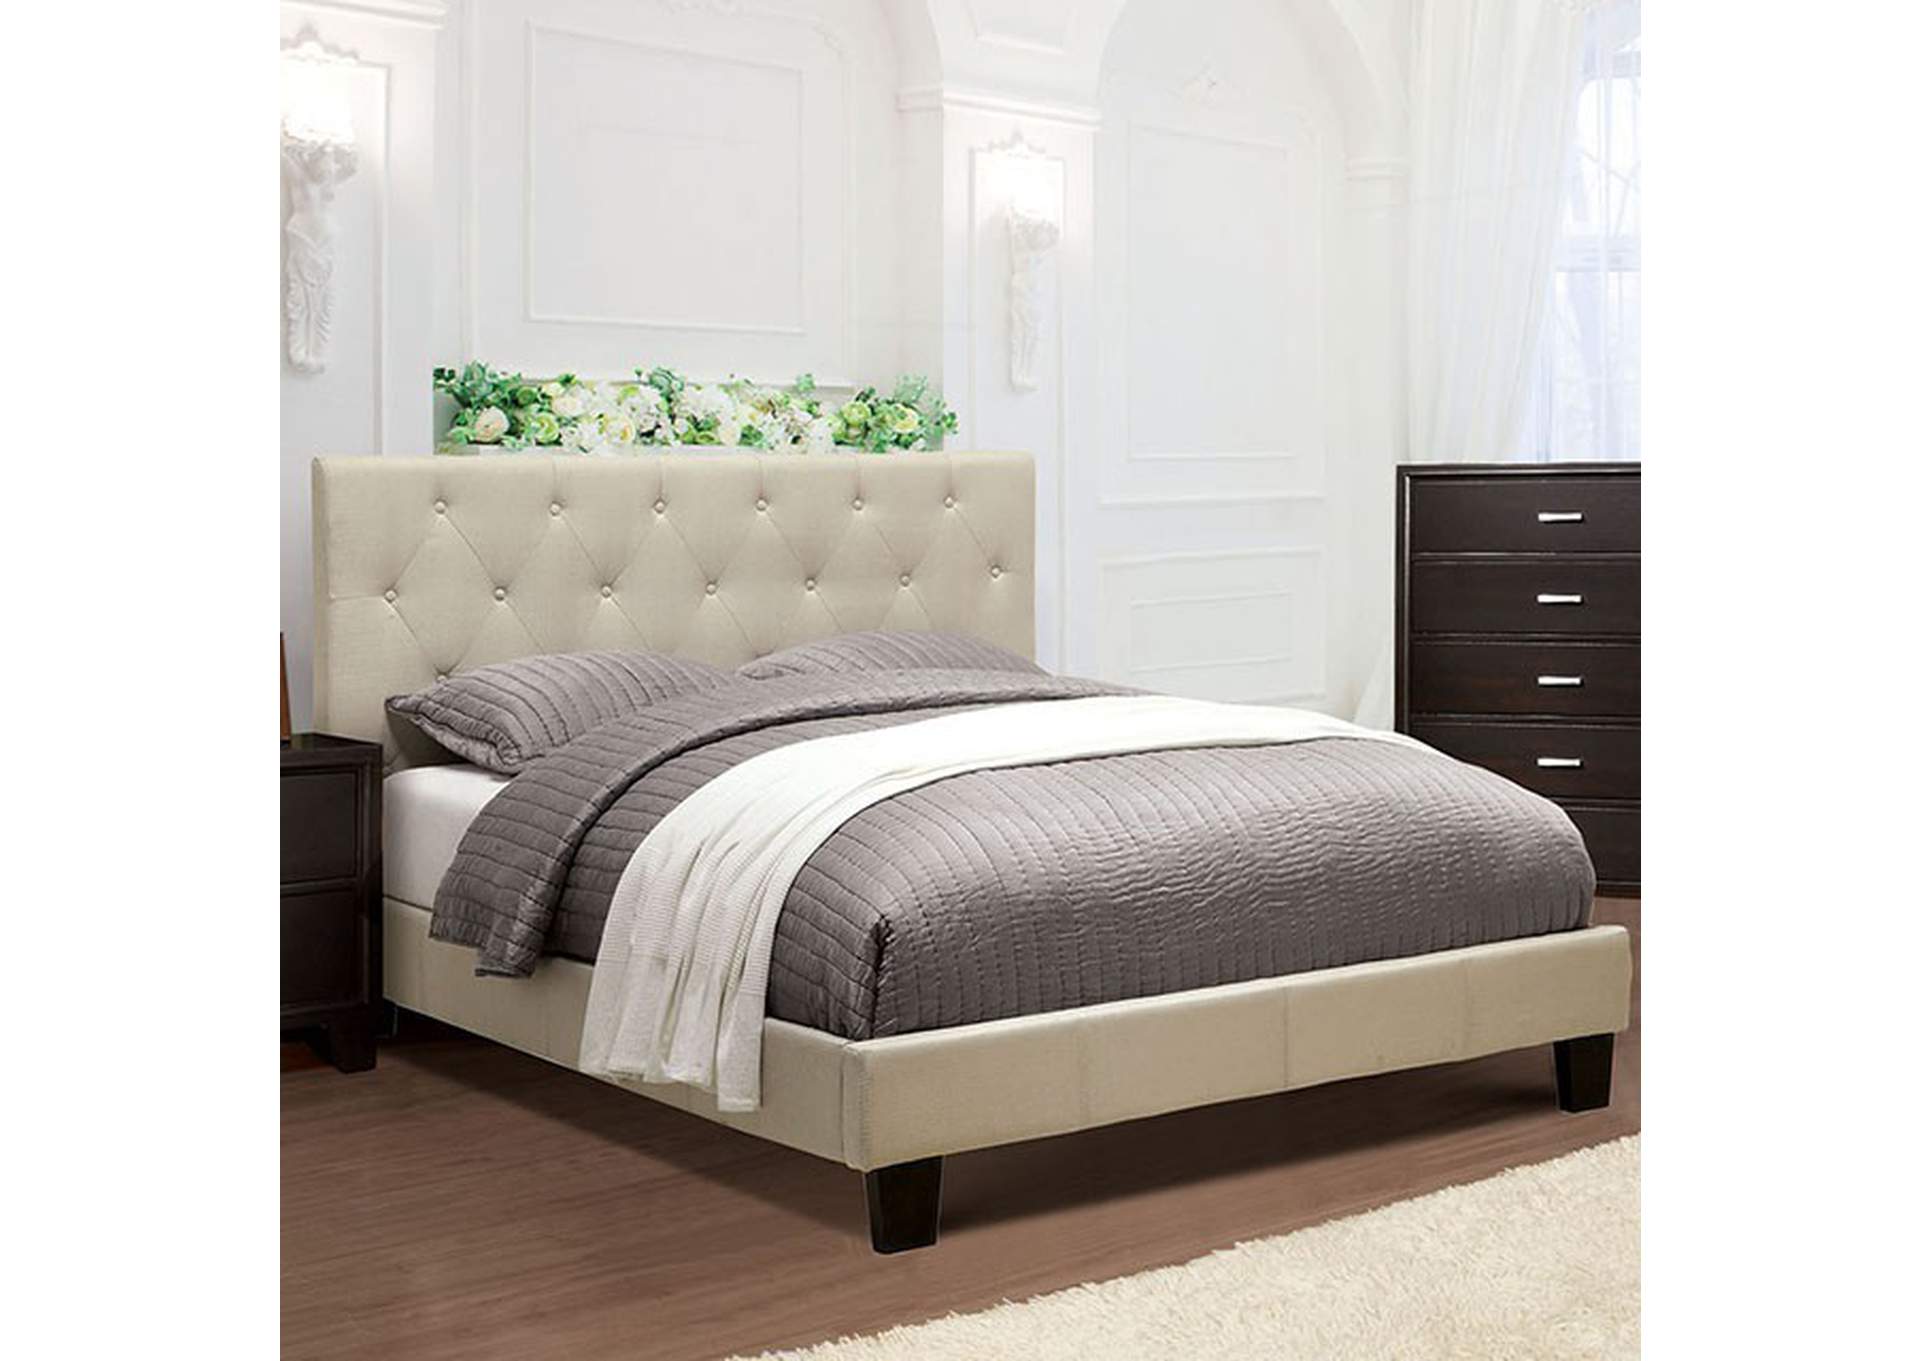 Leeroy E.King Bed,Furniture of America